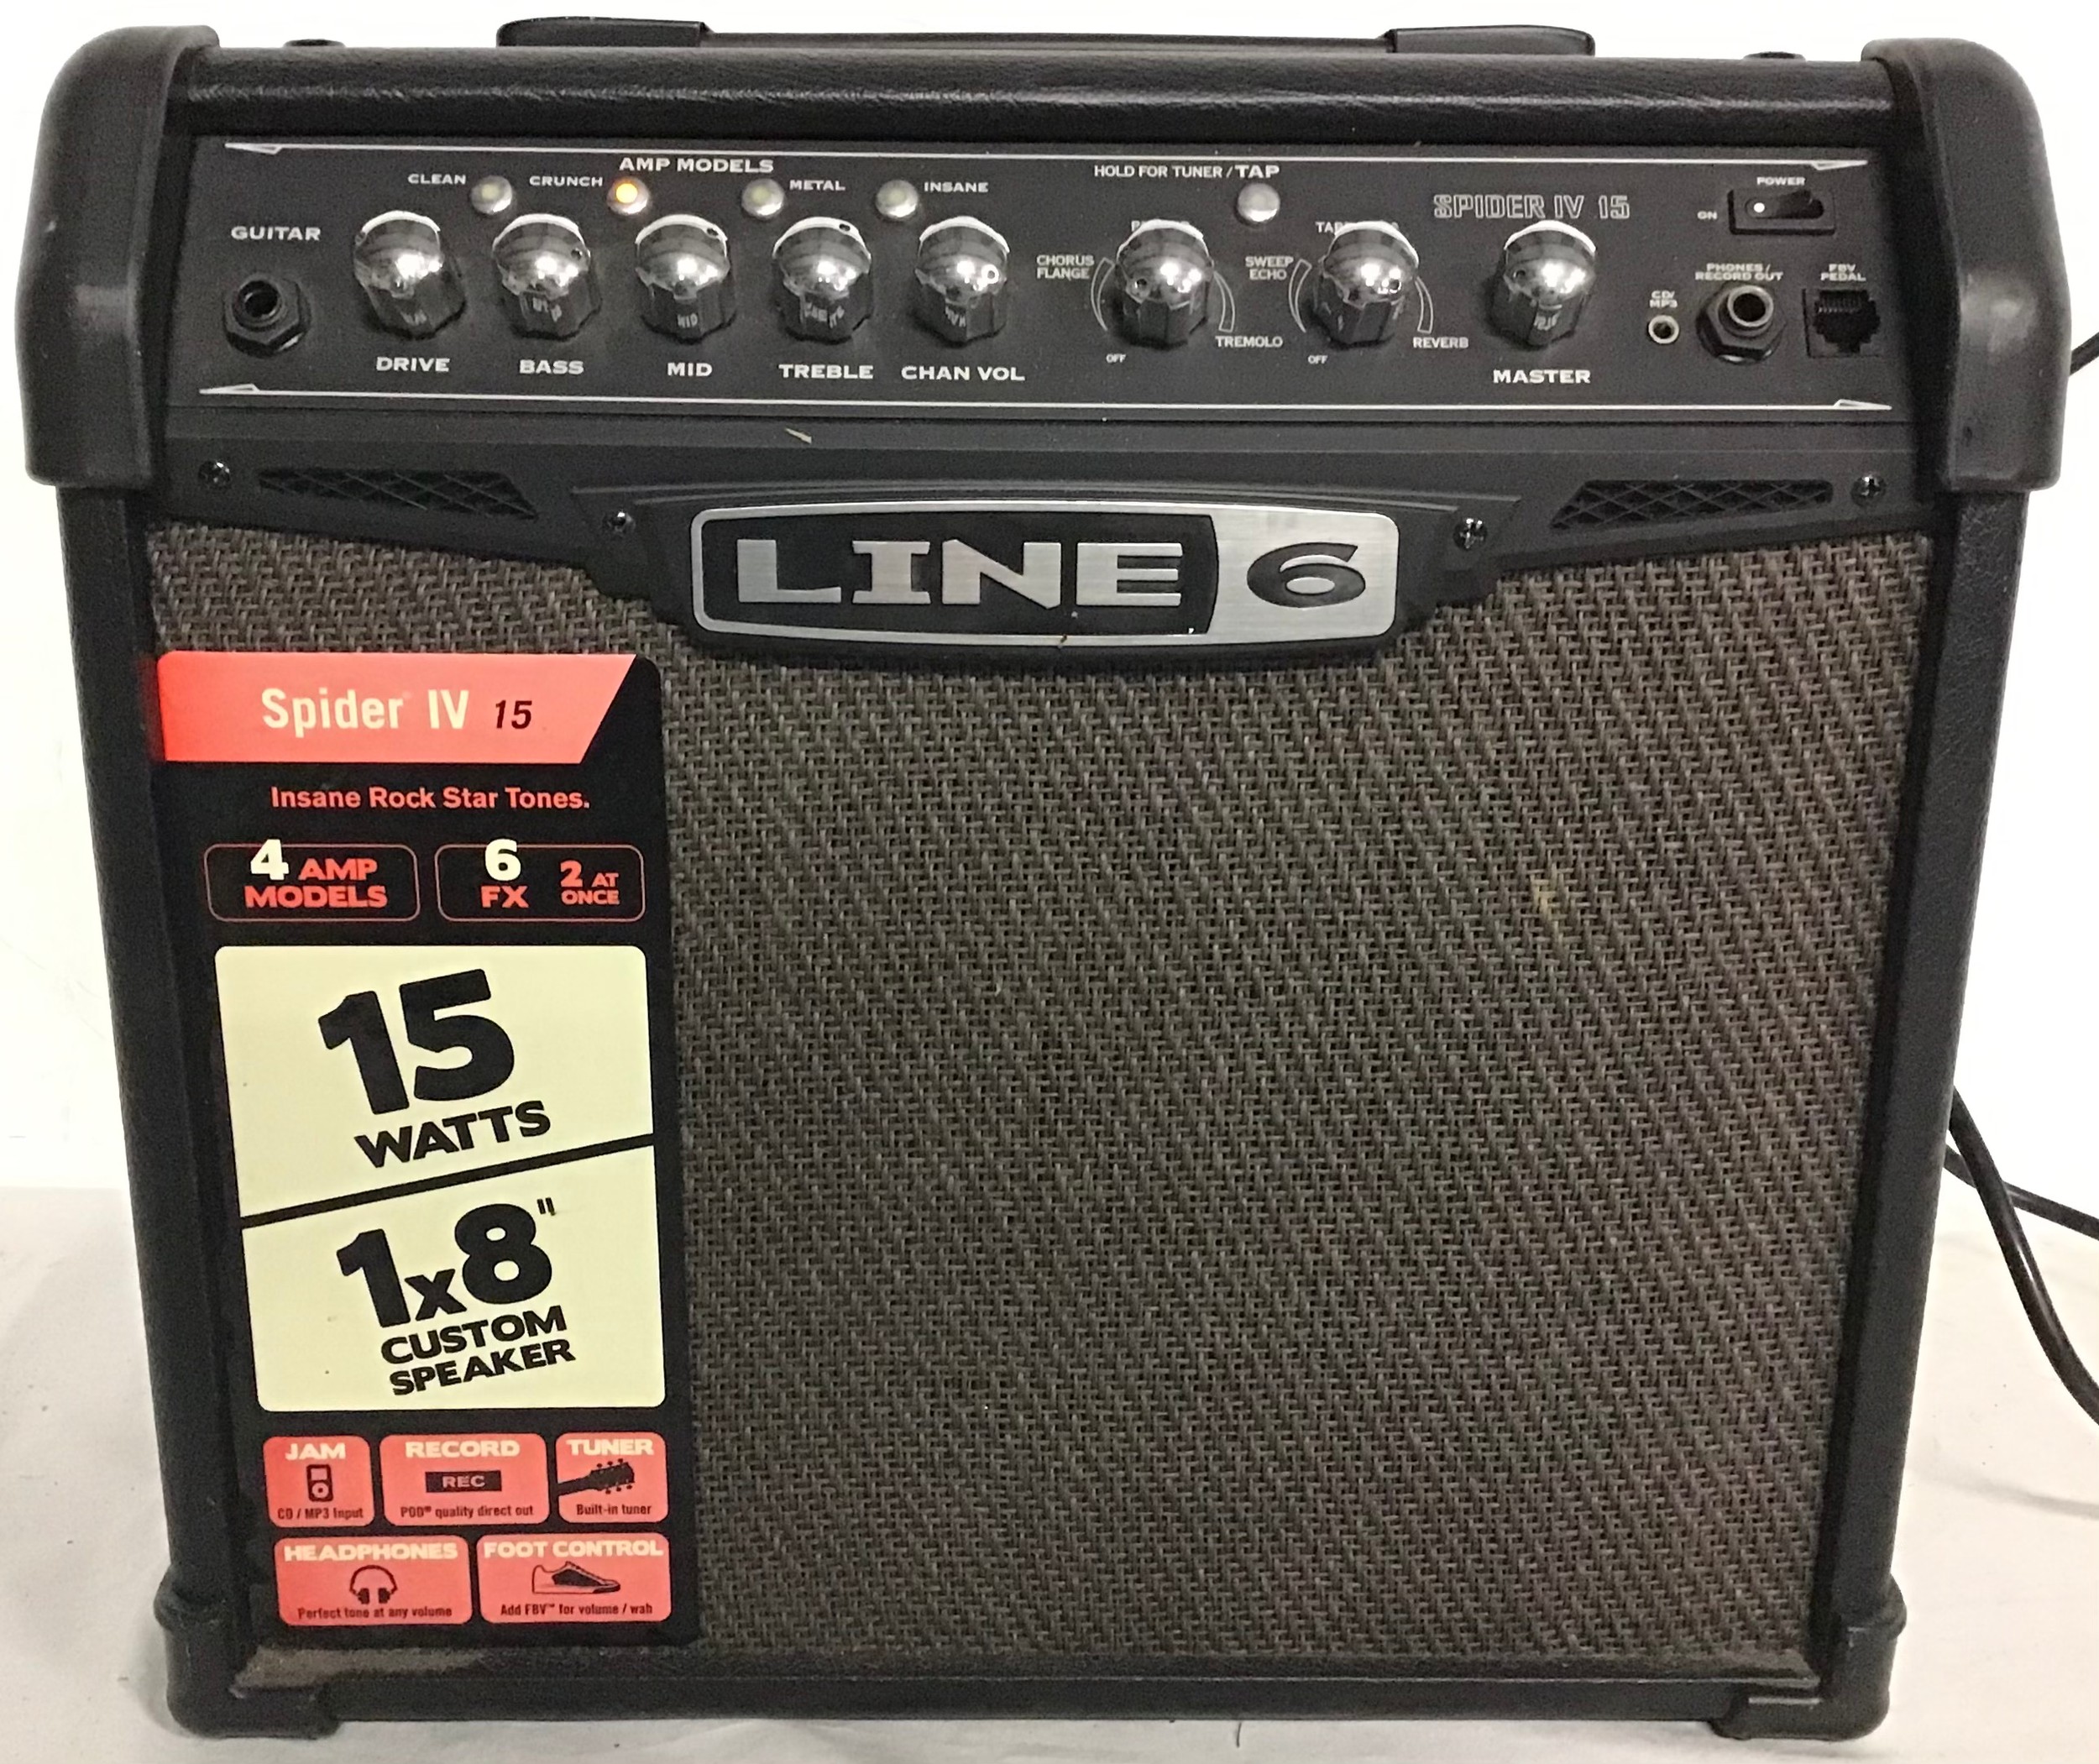 GUITAR AMPLIFIER BY LINE 6. This unit is model number Spider IV 15 and powers up when plugged in.